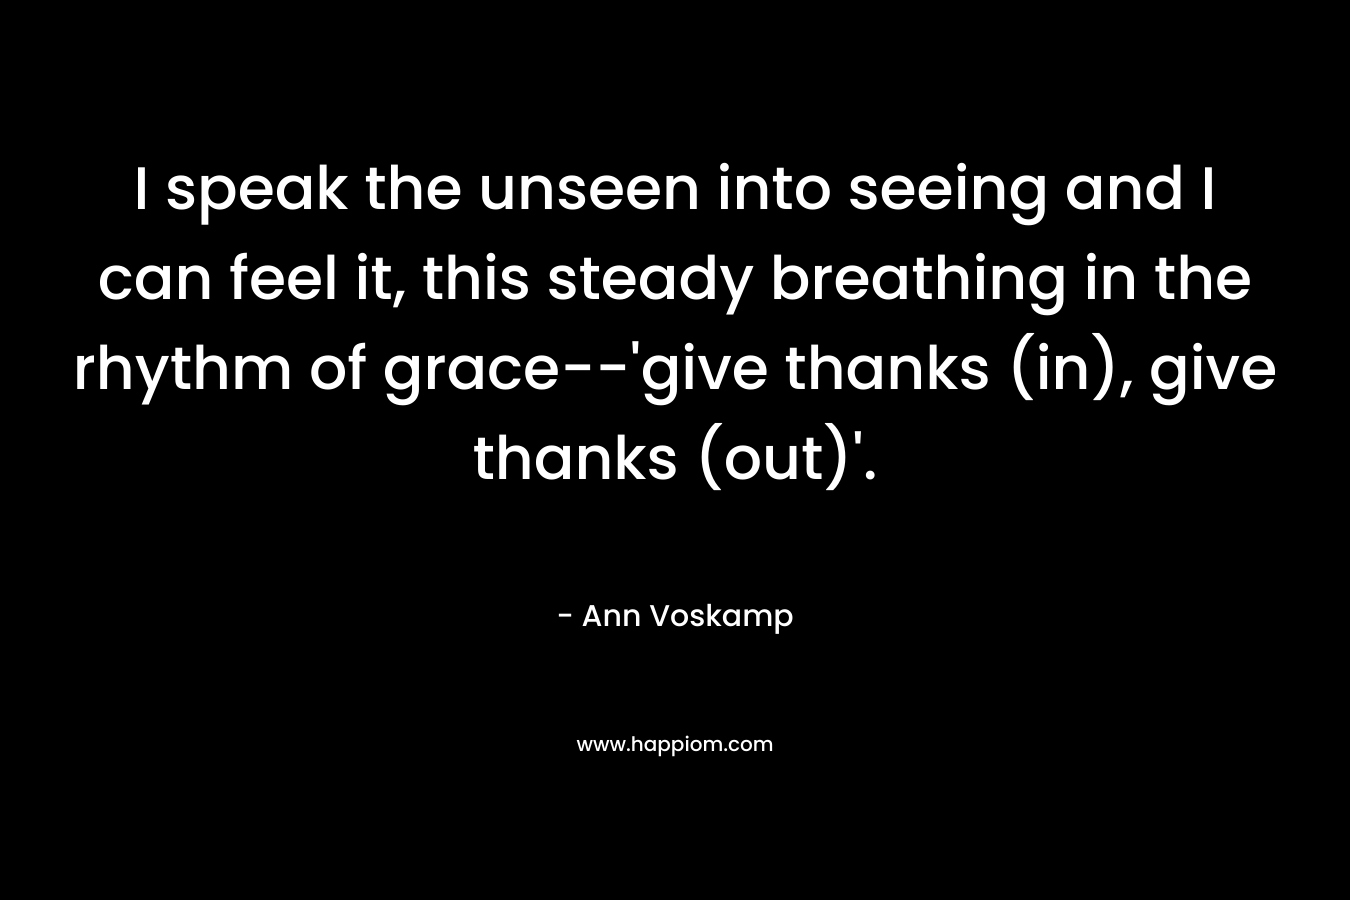 I speak the unseen into seeing and I can feel it, this steady breathing in the rhythm of grace--'give thanks (in), give thanks (out)'.